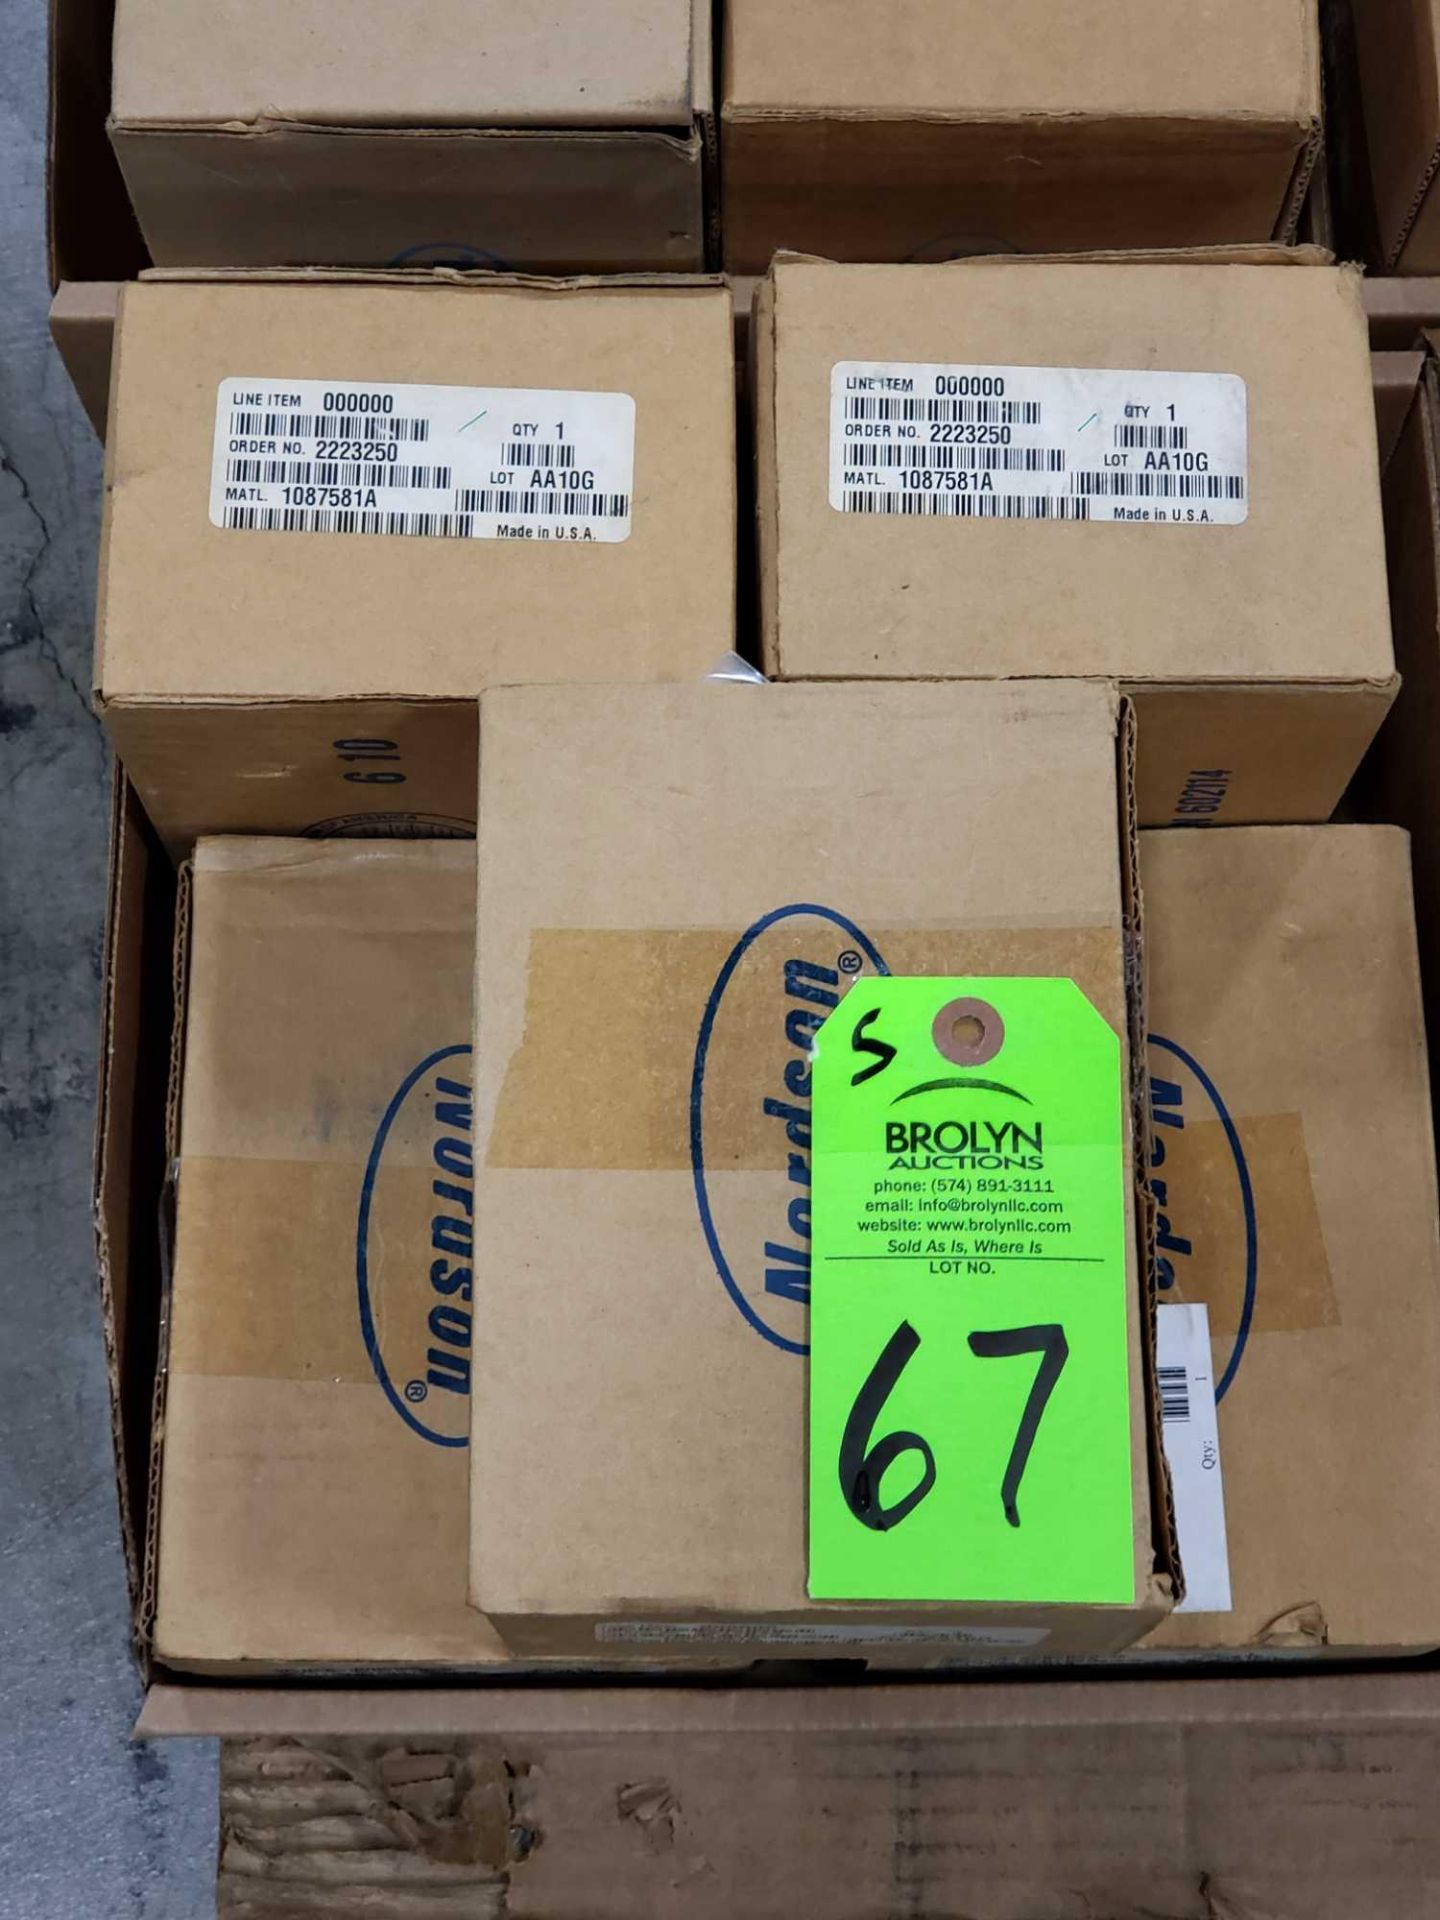 Qty 5 - Nordson model 1087581A. New in boxes.